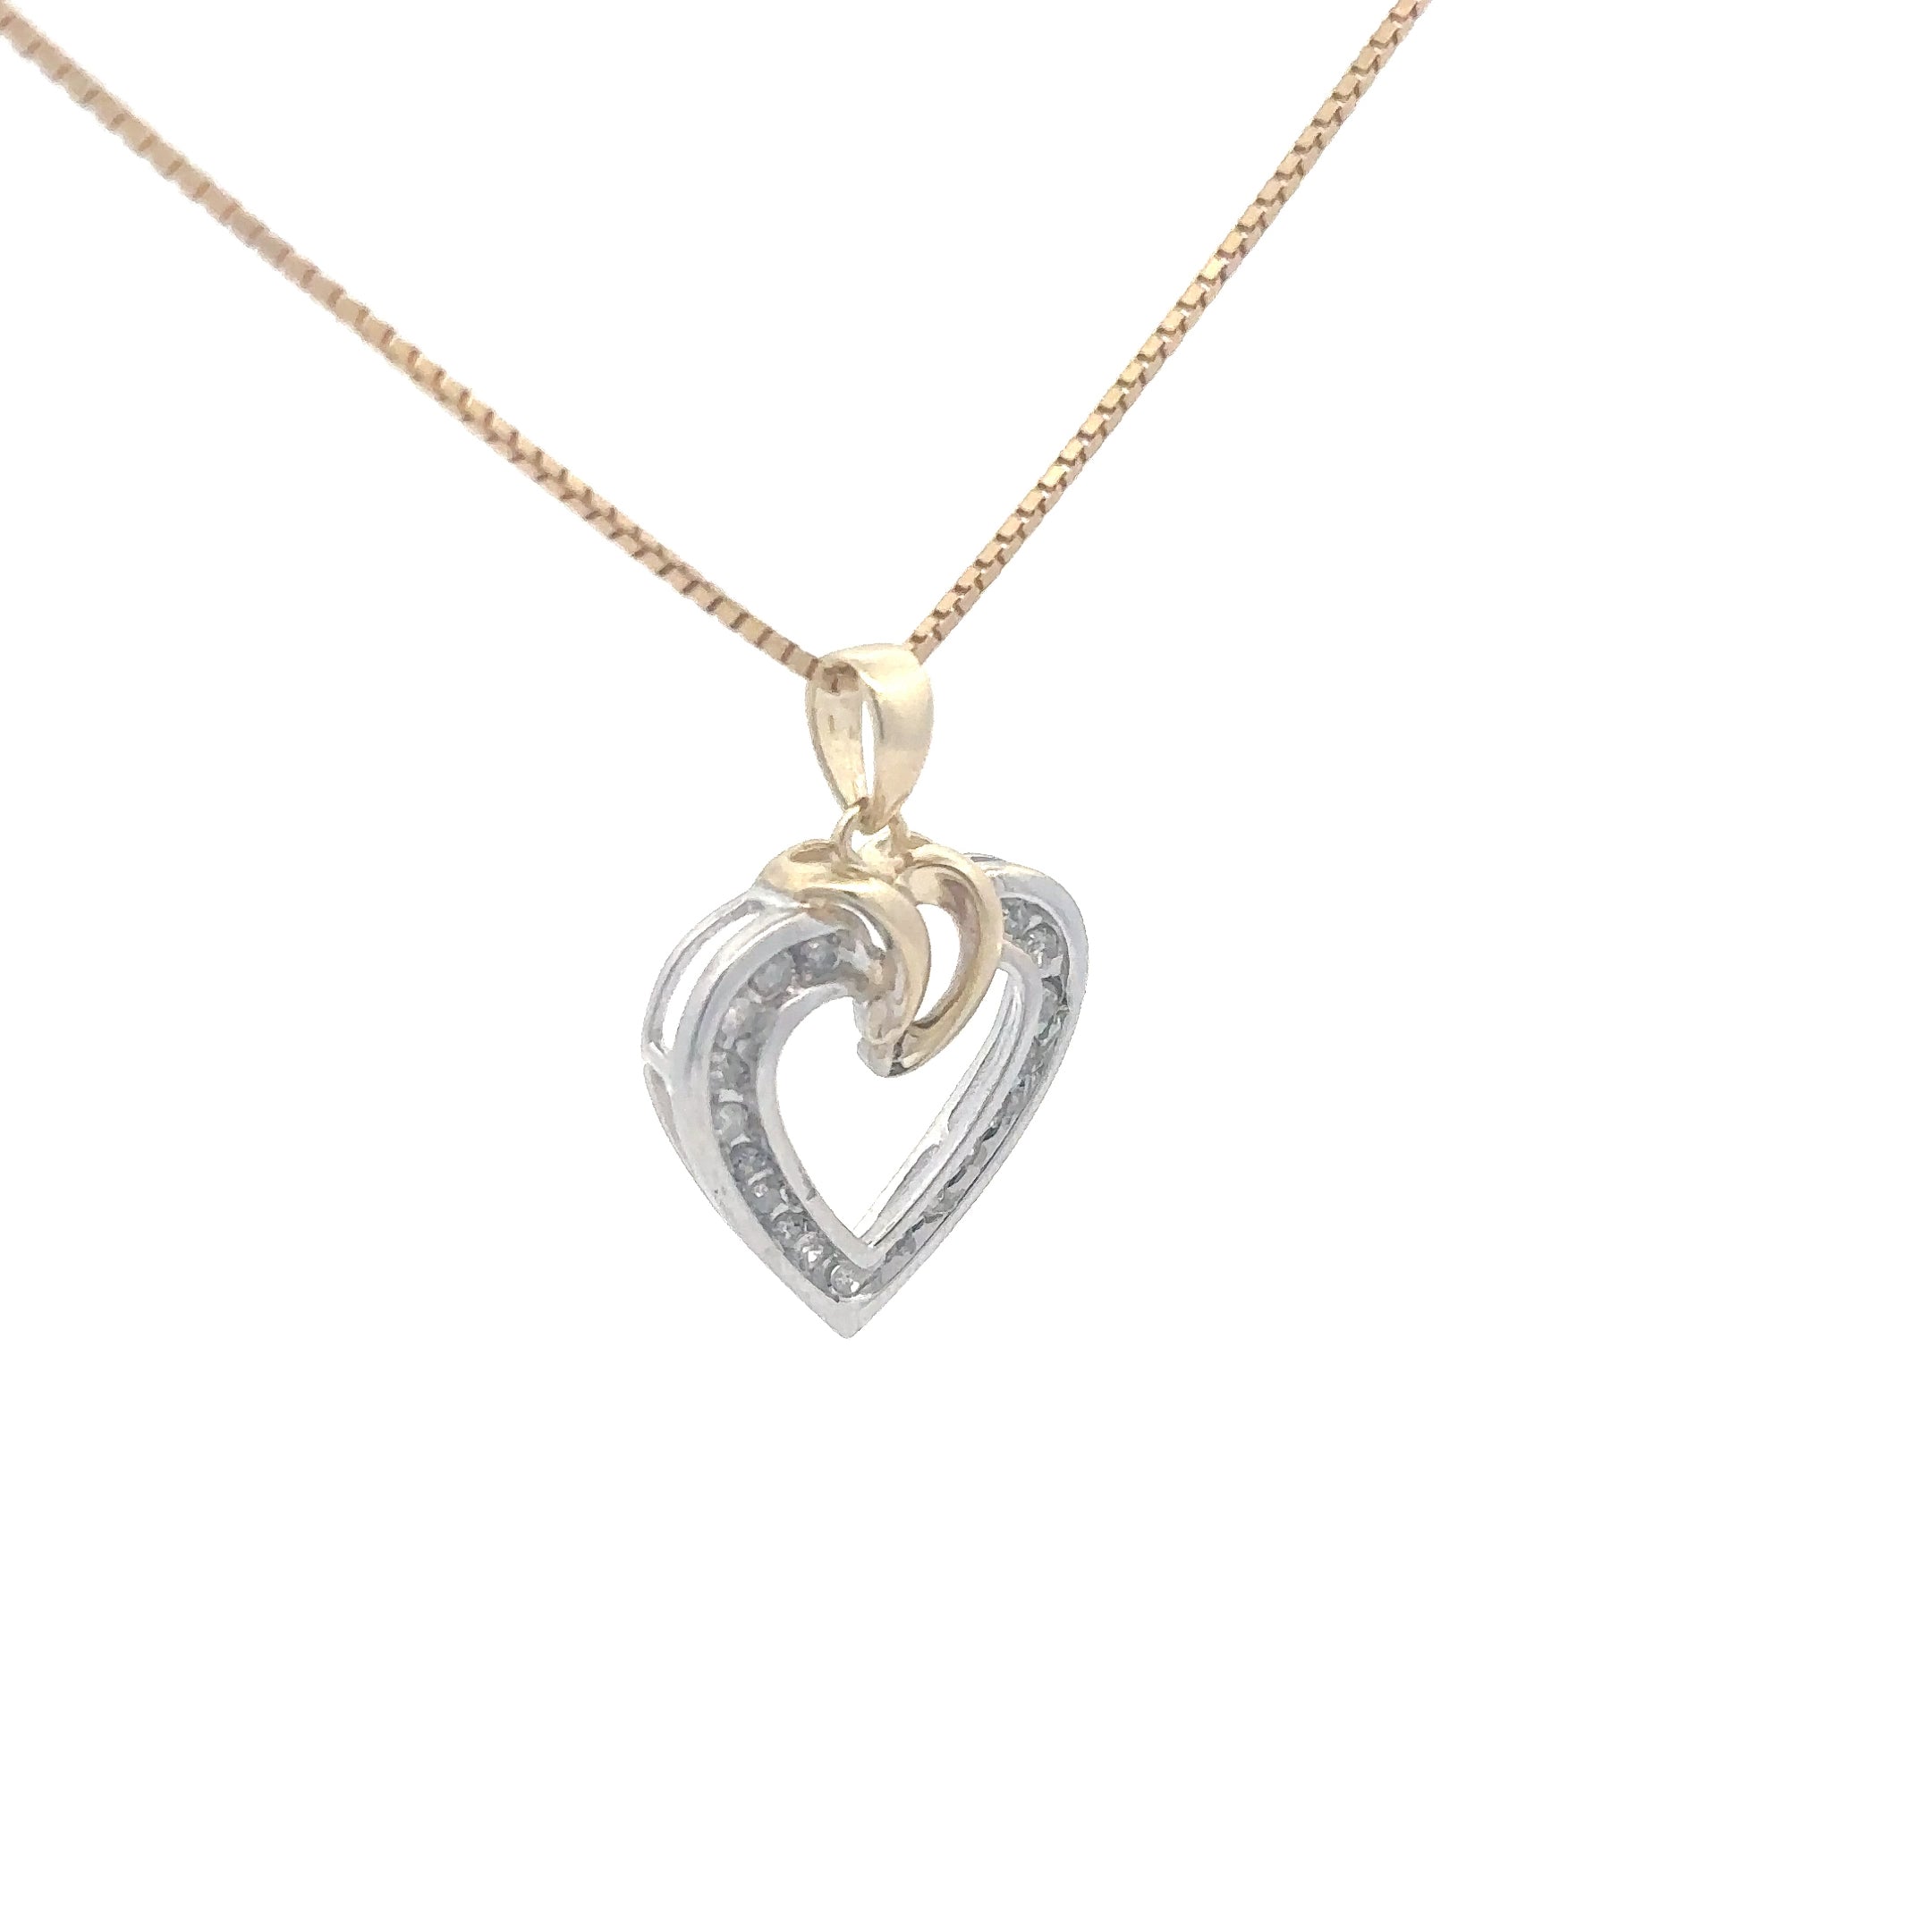 Estate Collection: 10K White & Yellow Gold Two-Toned Diamond Heart Pendant without Chain